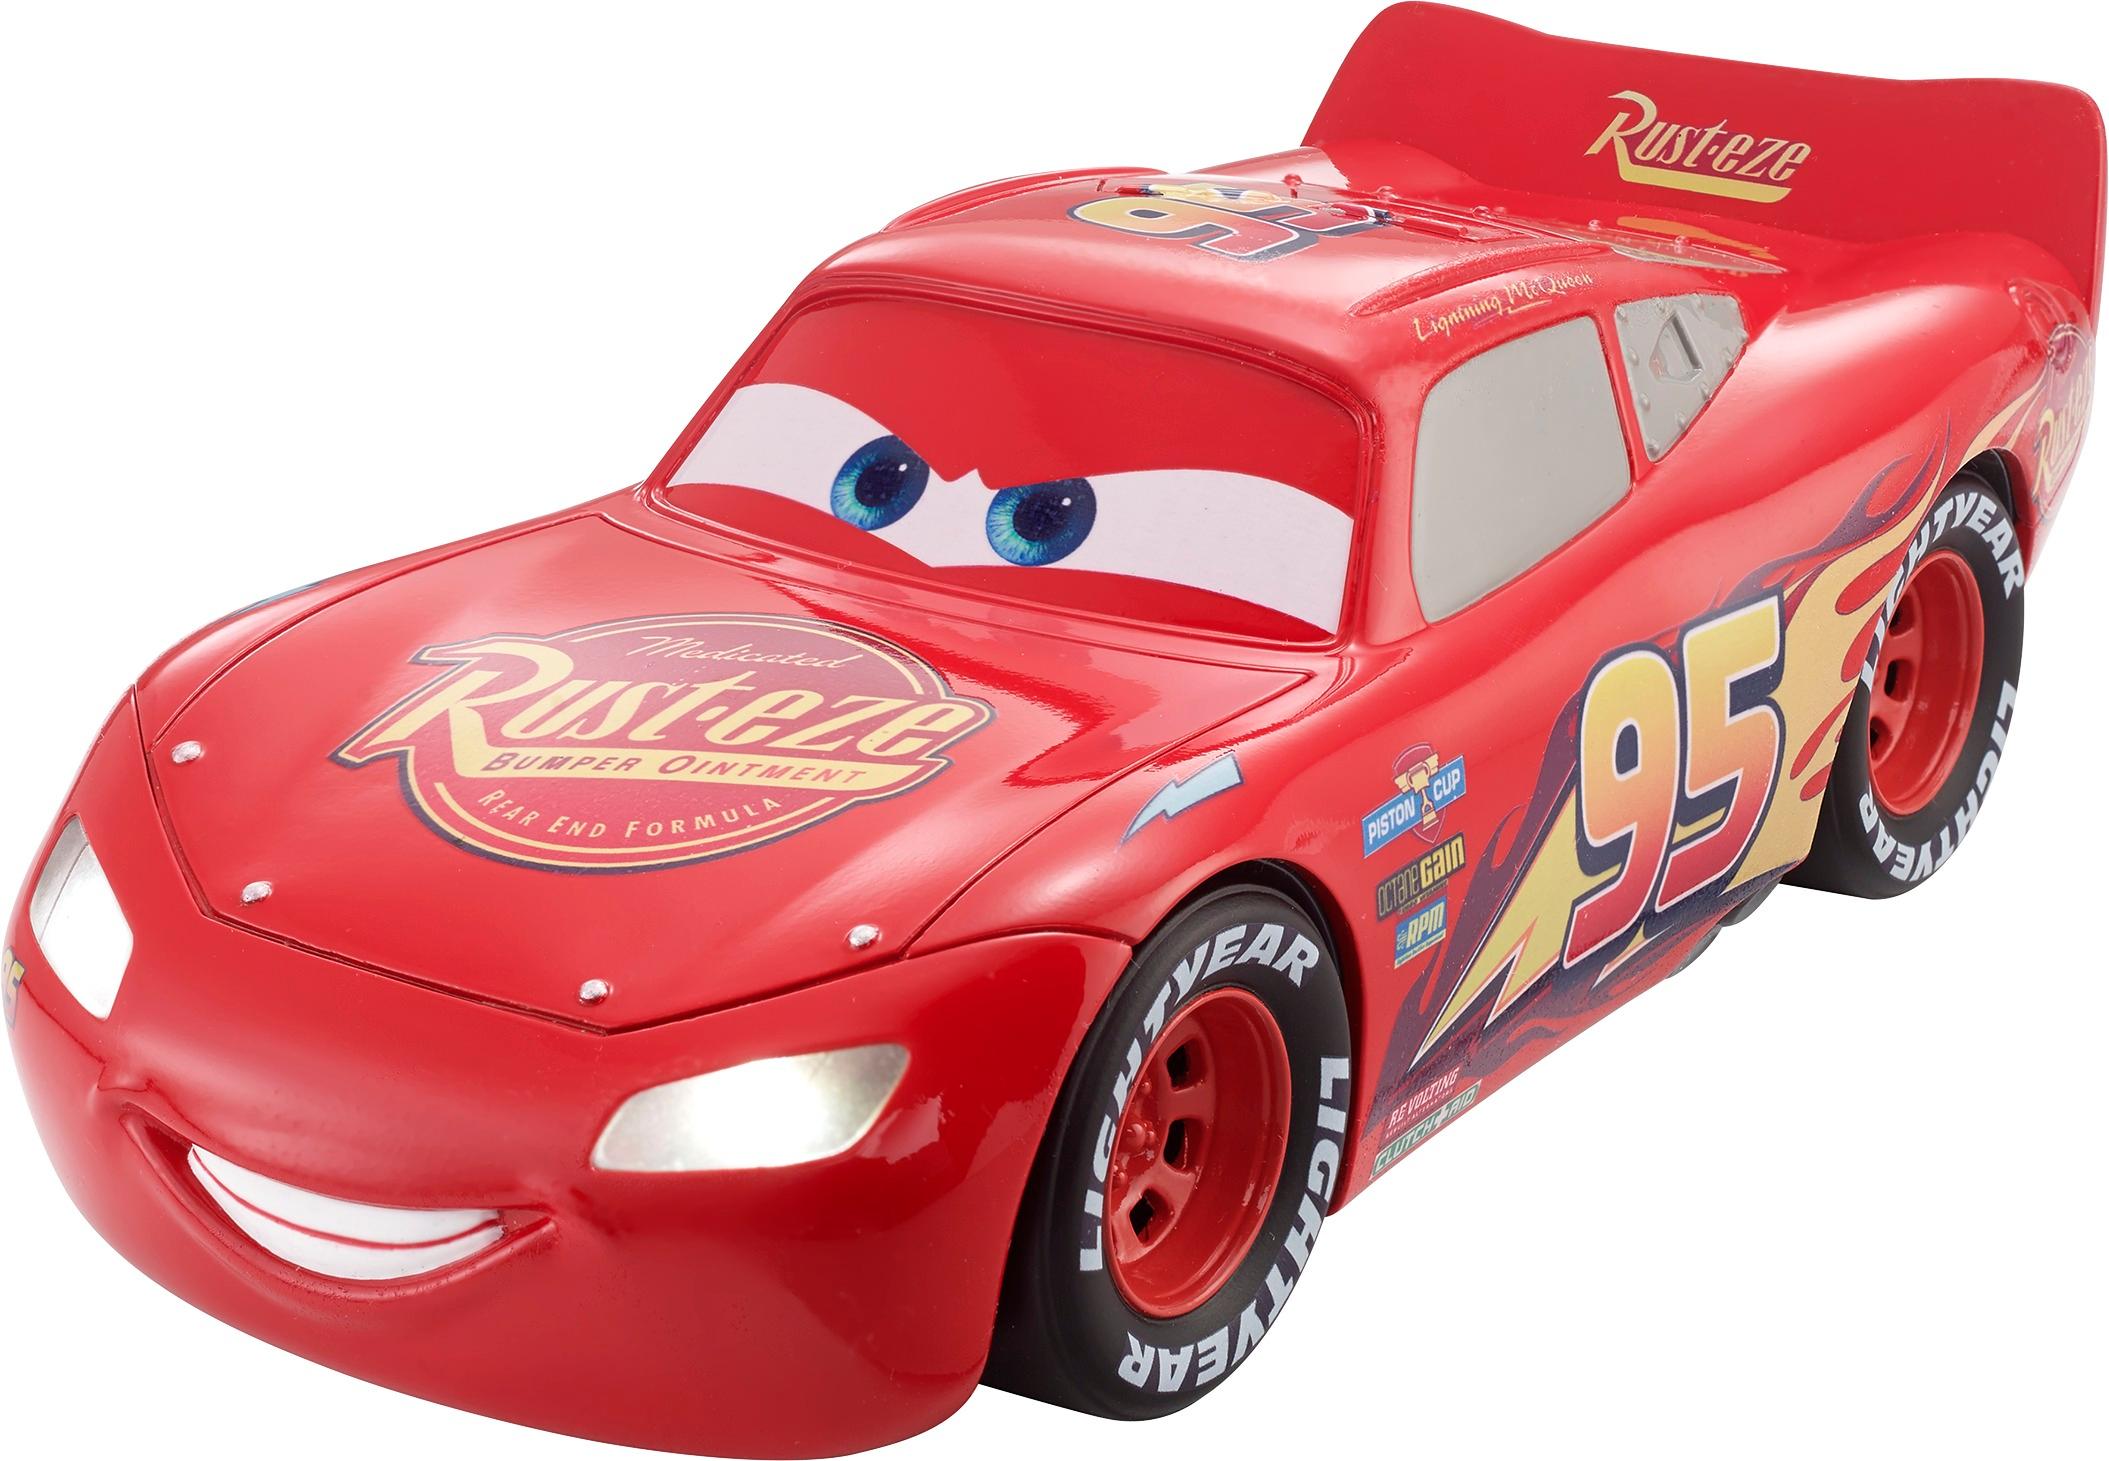 Disney•Pixar Cars 3 Lights and Sounds Talking Toy Vehicle Styles May Vary  DXY21 - Best Buy